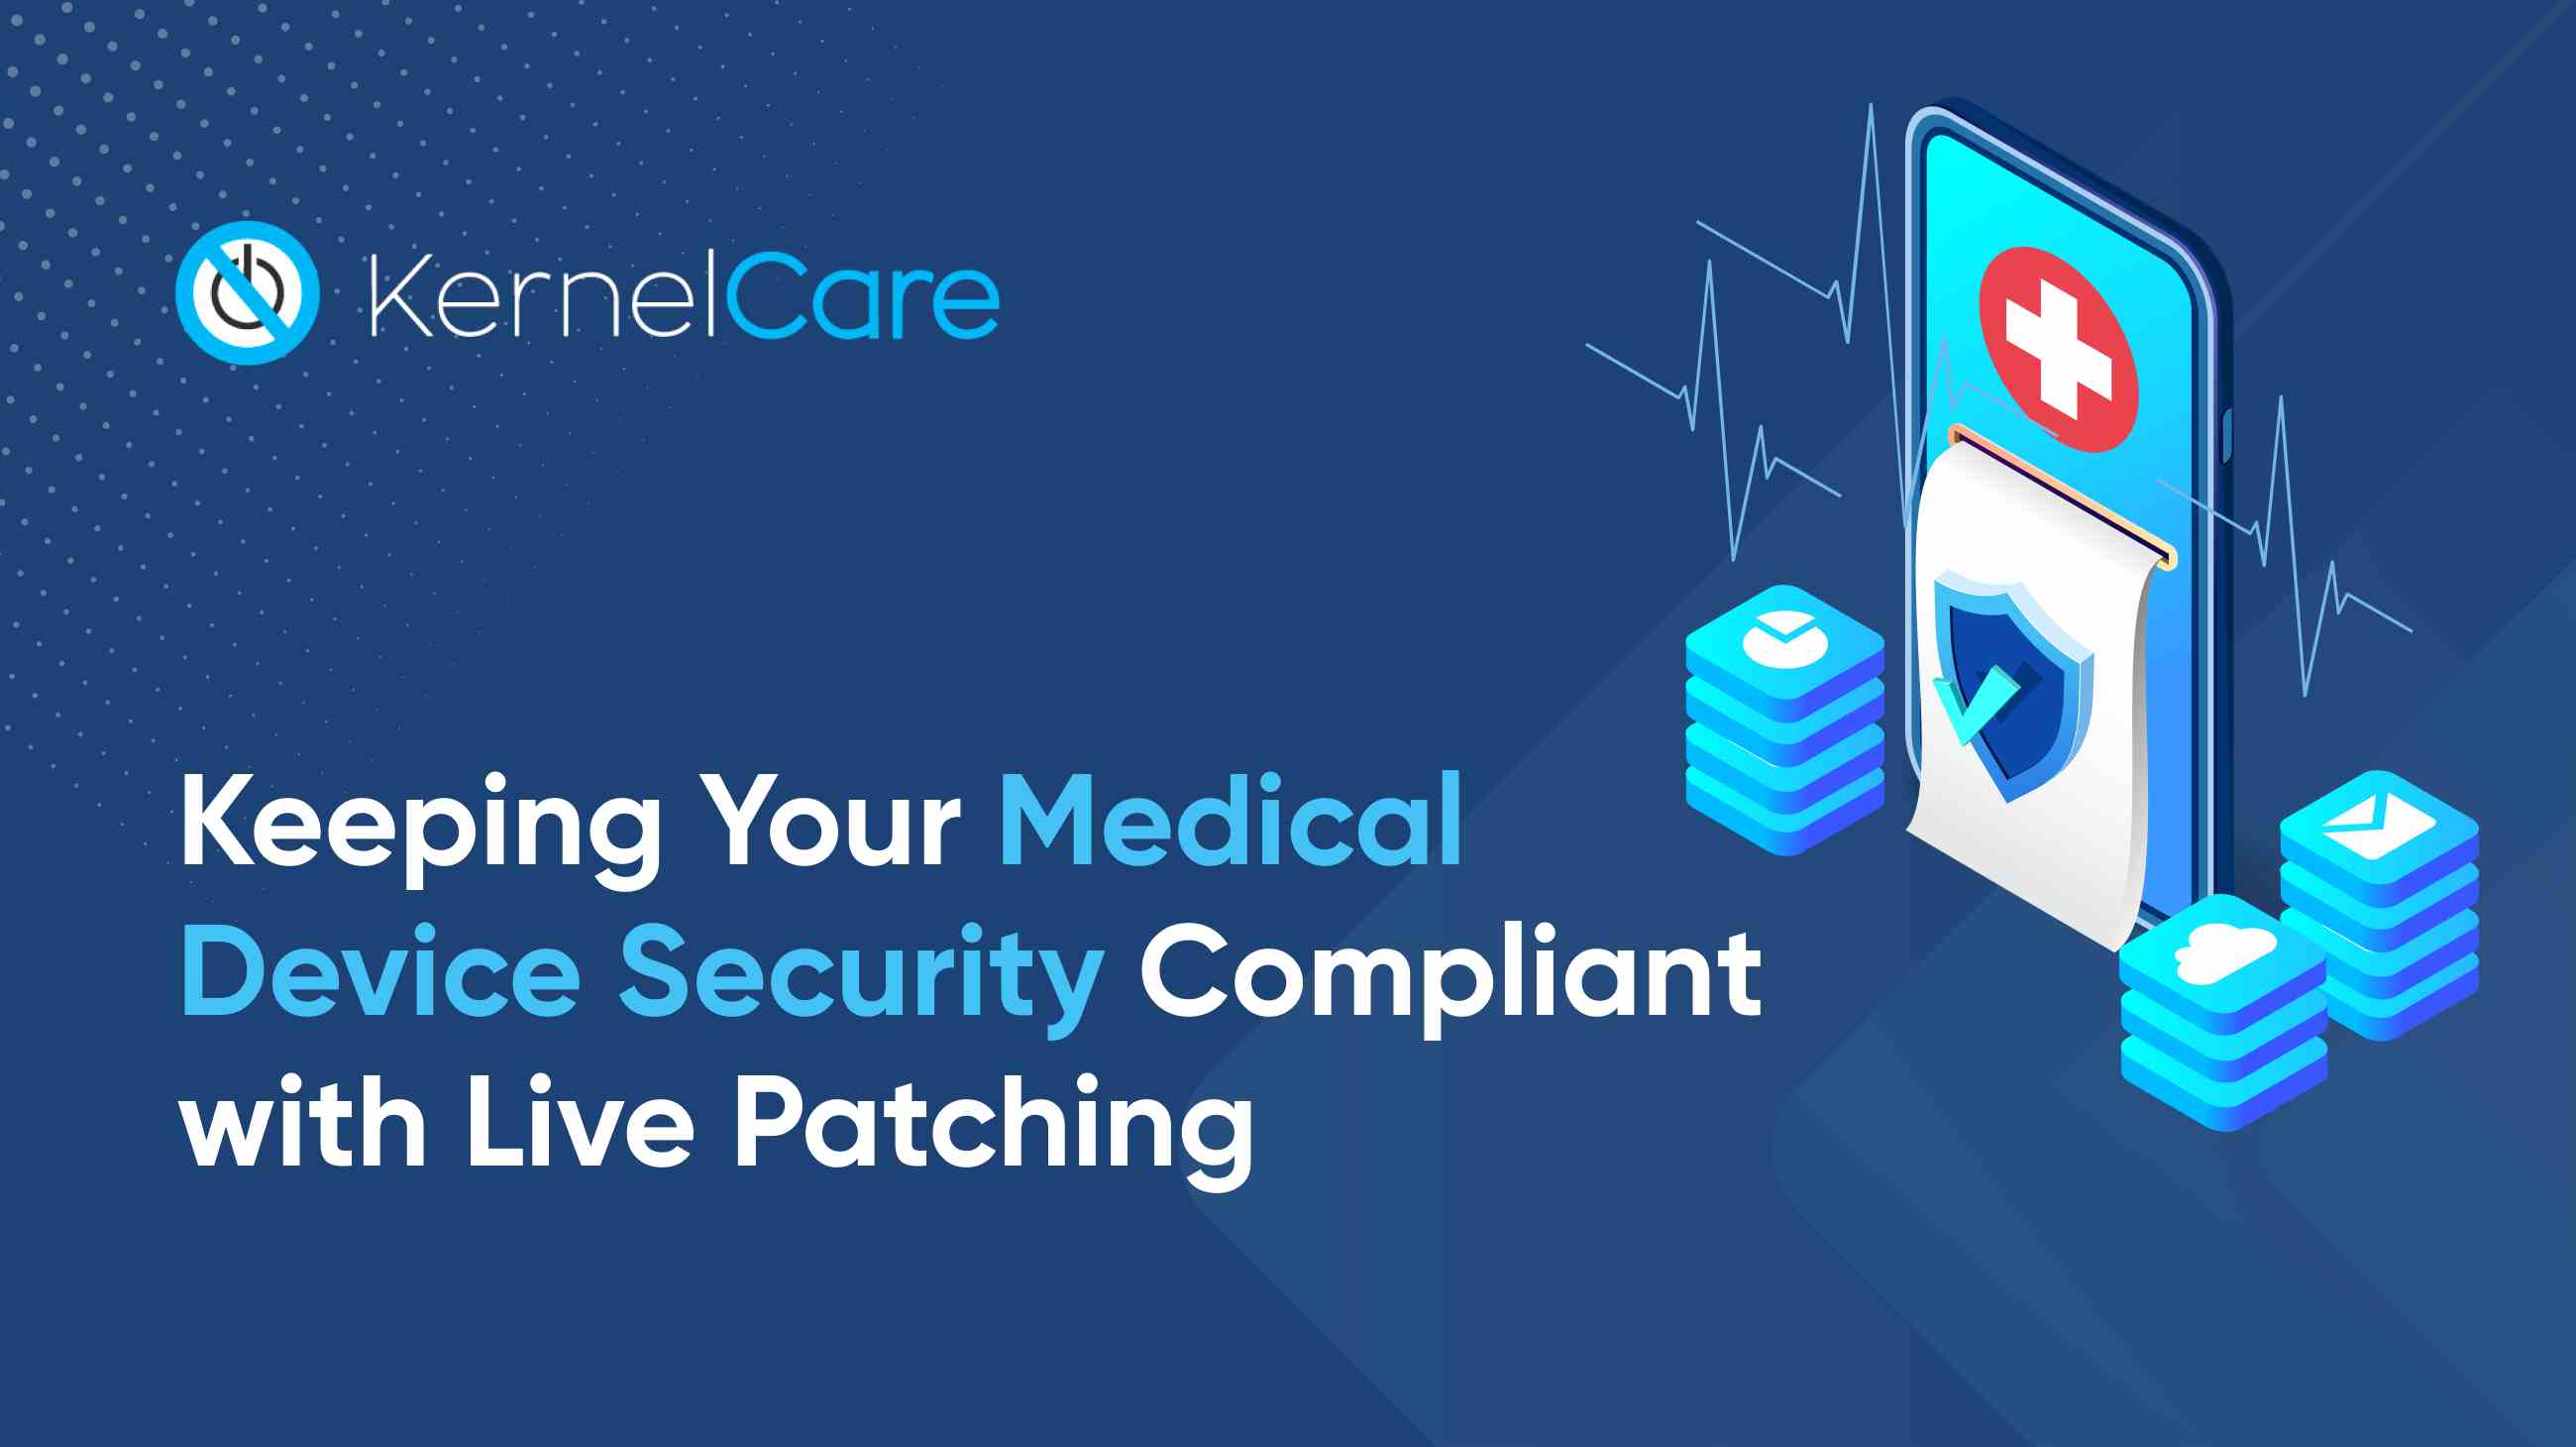 Keeping Your Medical Device Security Compliant with Live Patching